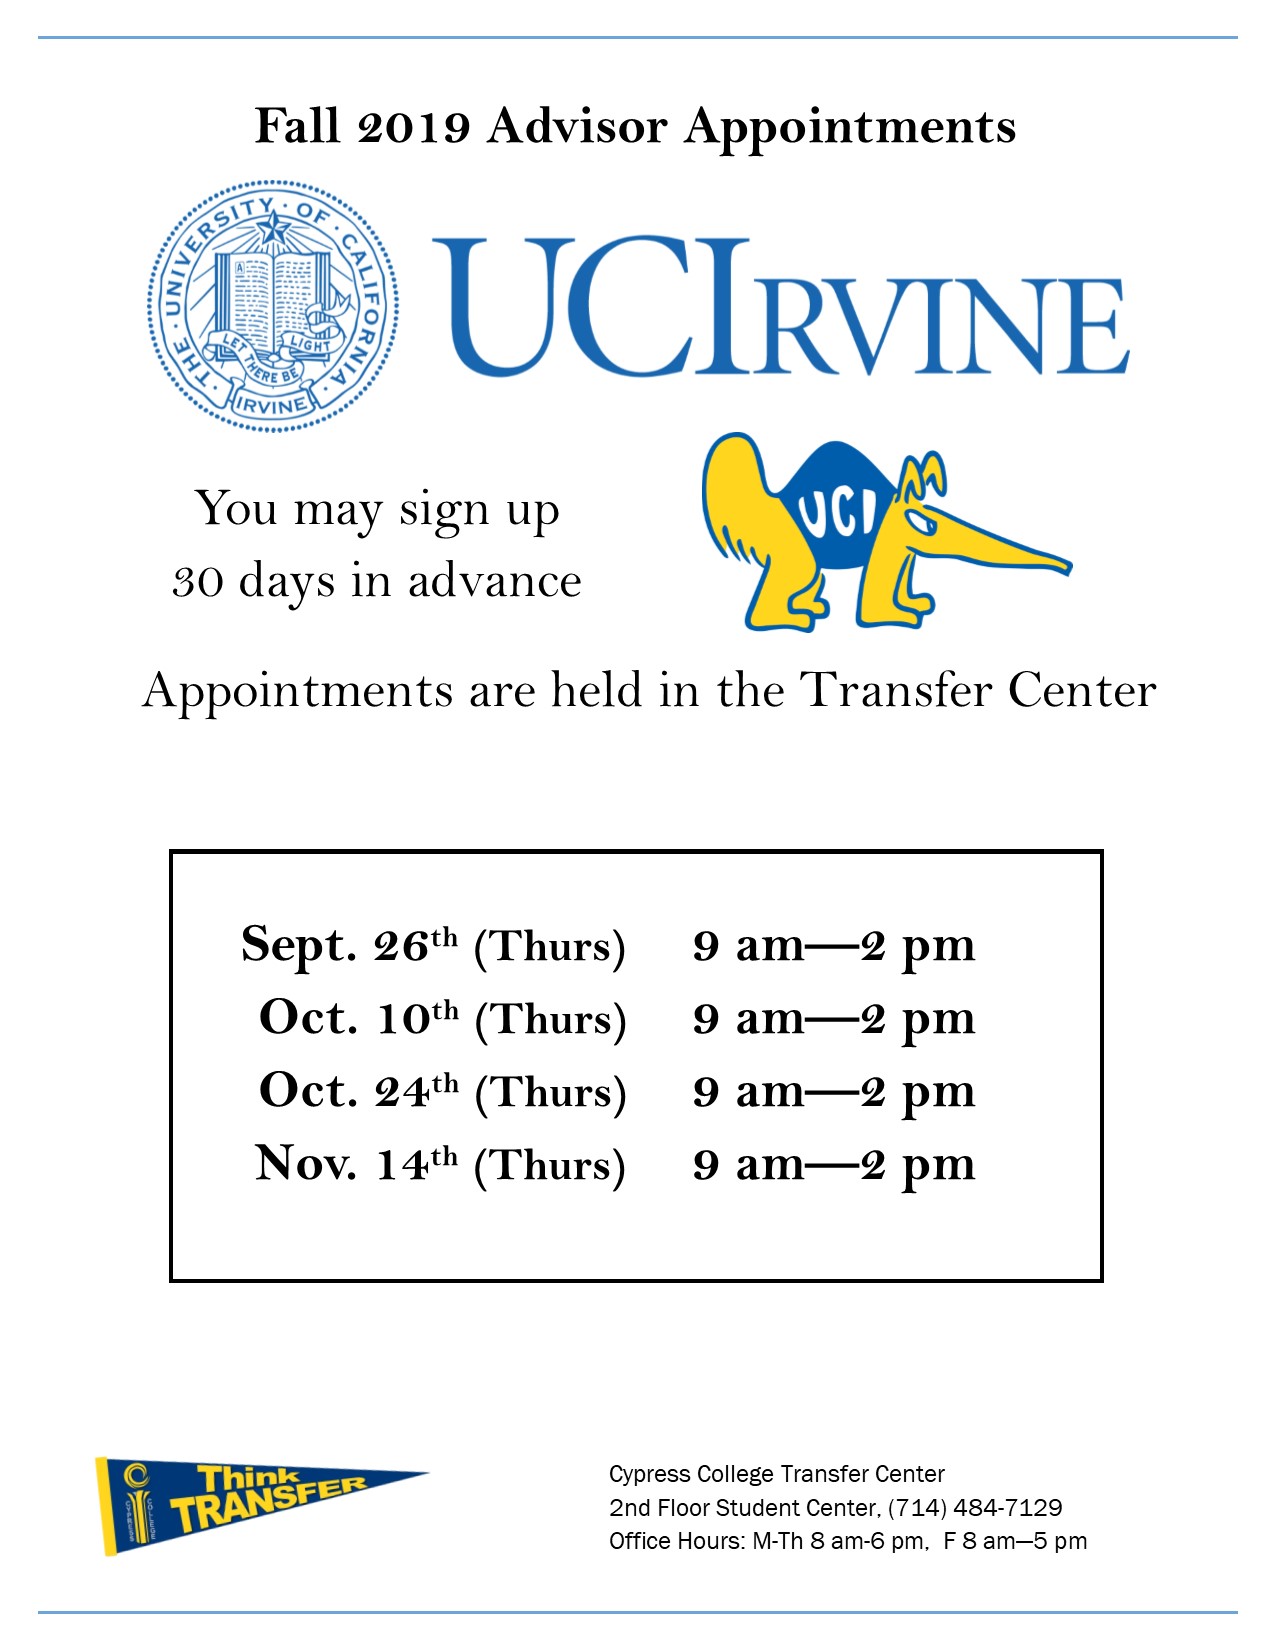 UC Irvine Fall 2019 Advisor Appointments flyer